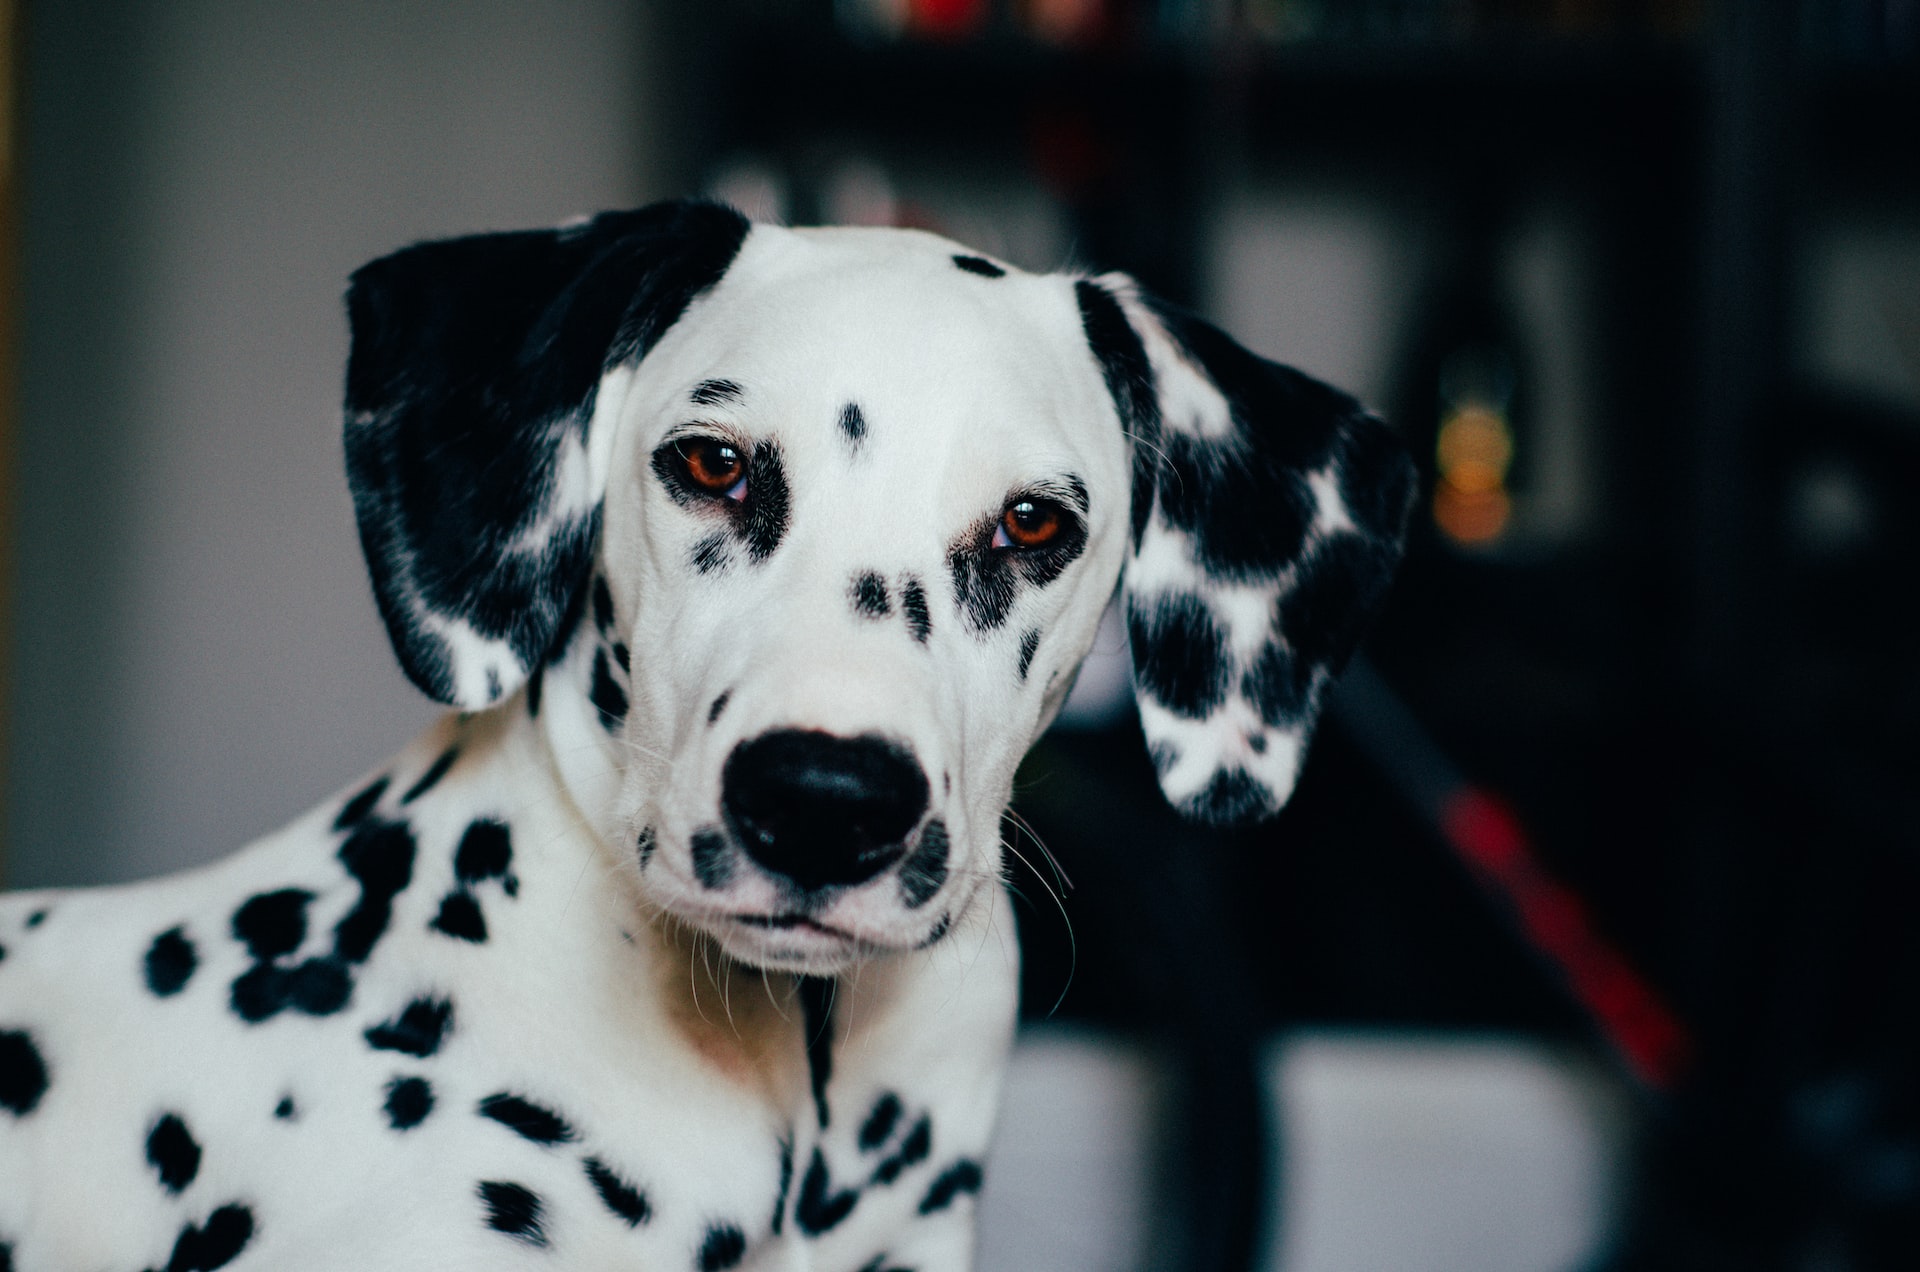 What Is the Lifespan of a Dalmatian?